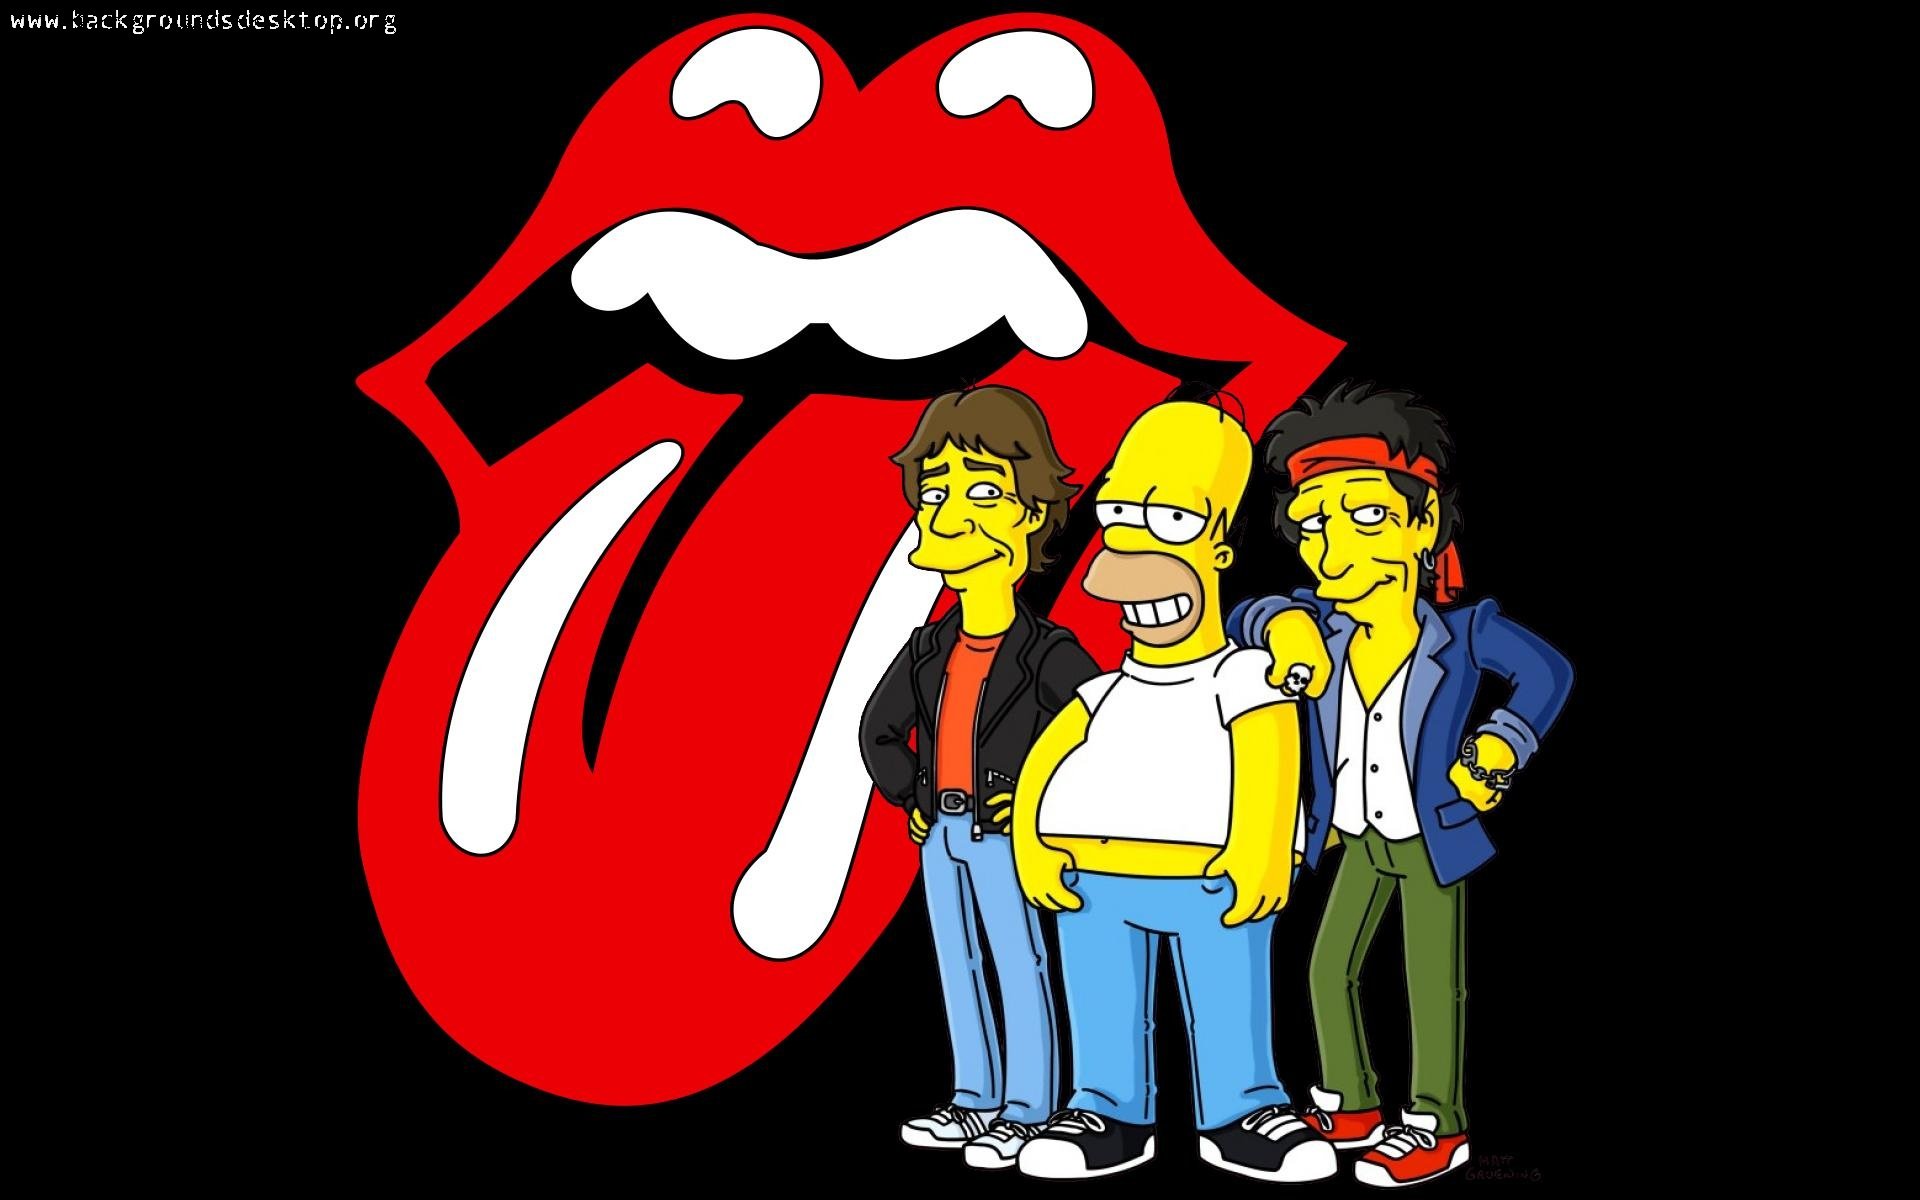  The Rolling Stones desktop background The Rolling Stones wallpapers